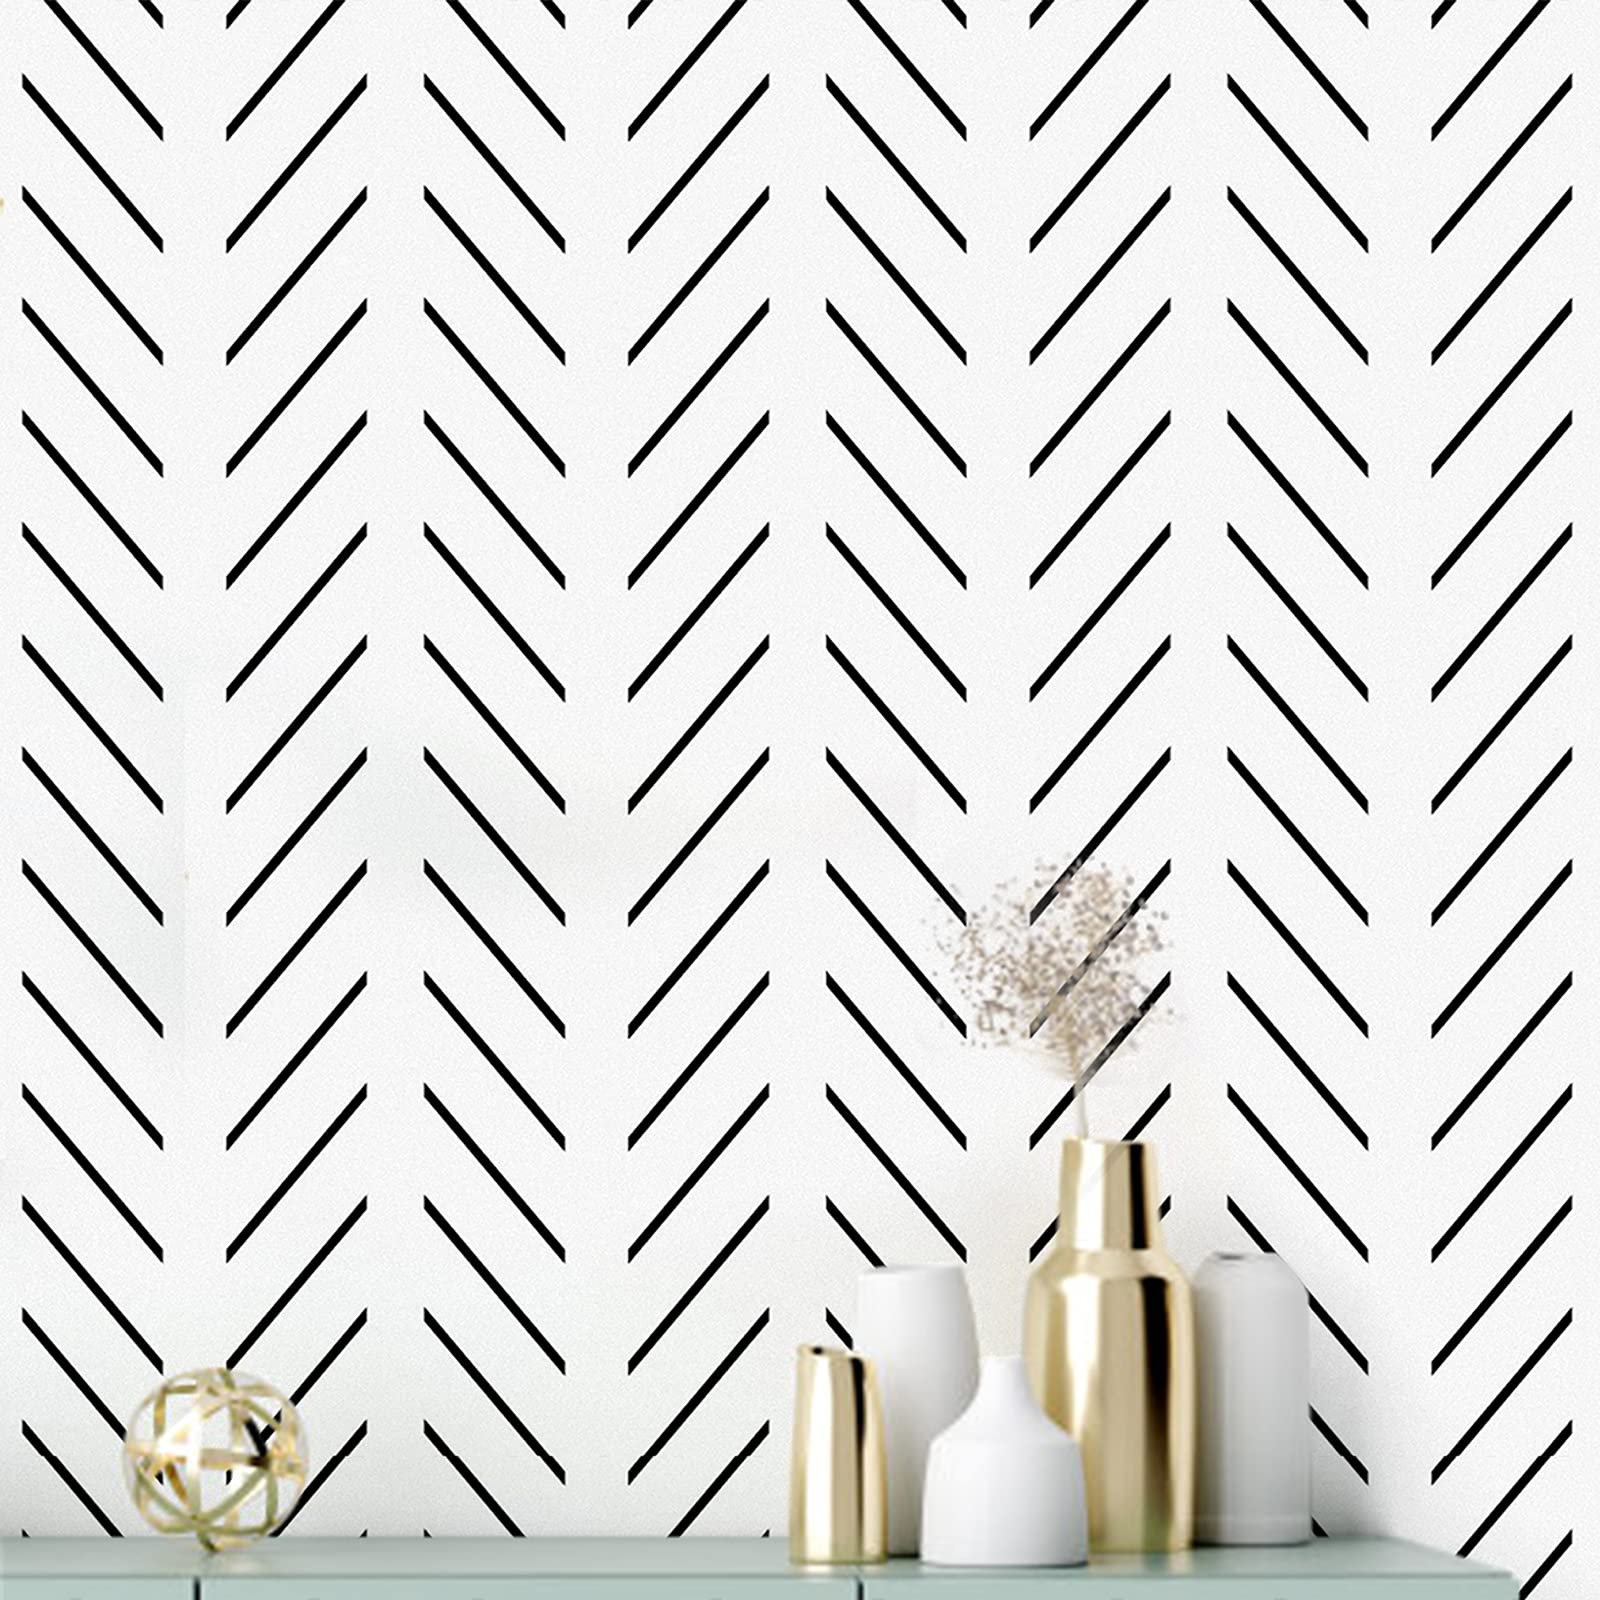 Black and White Peel and Stick Wallpaper Geometric Removable Reform Decor